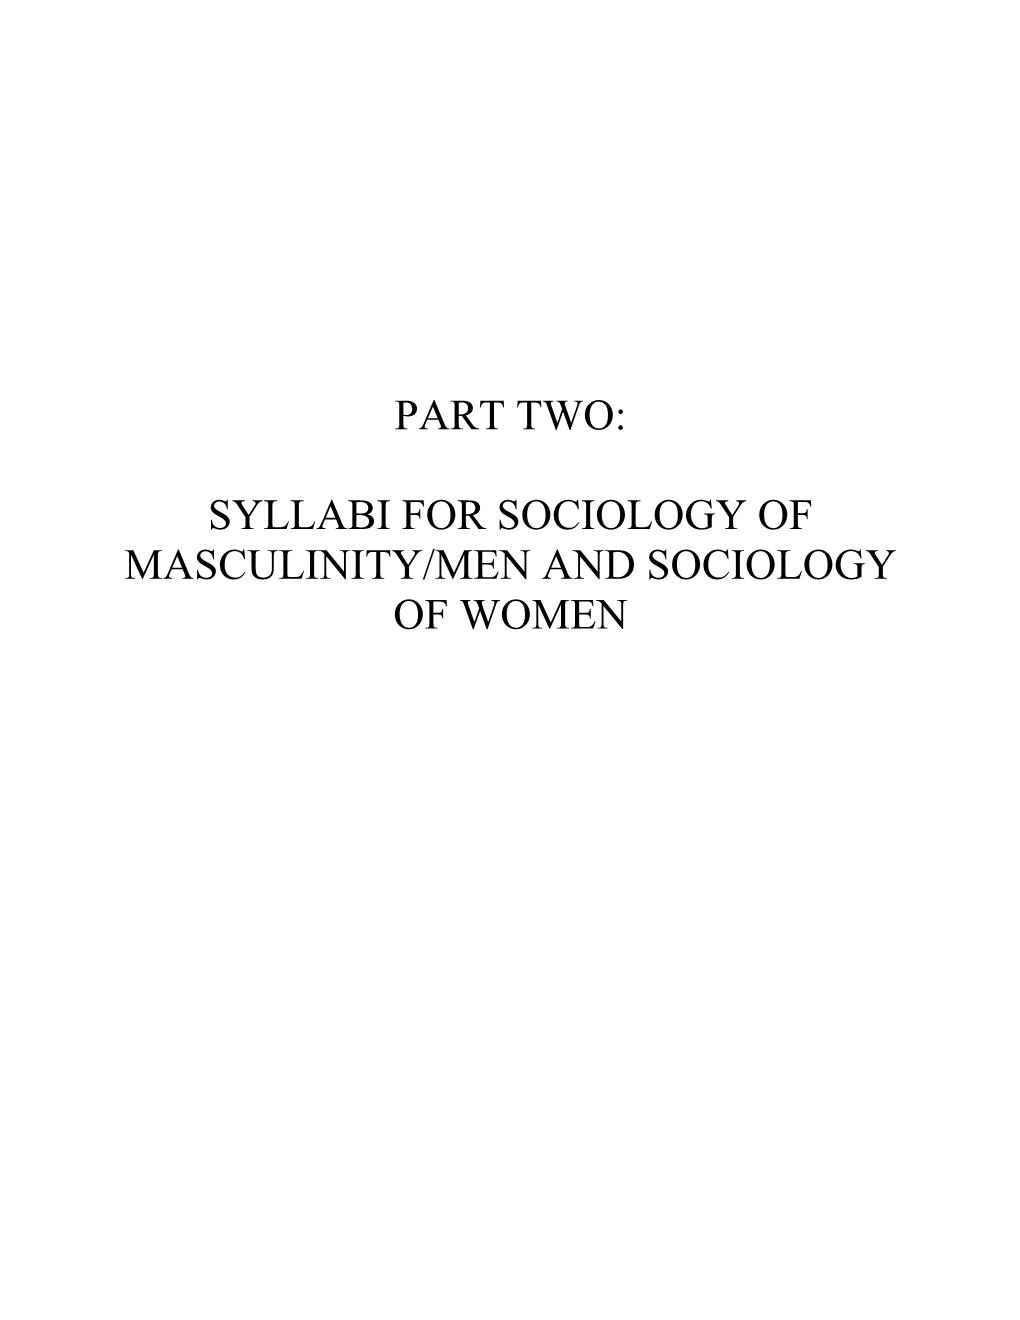 Part Two: Syllabi for Sociology of Masculinity